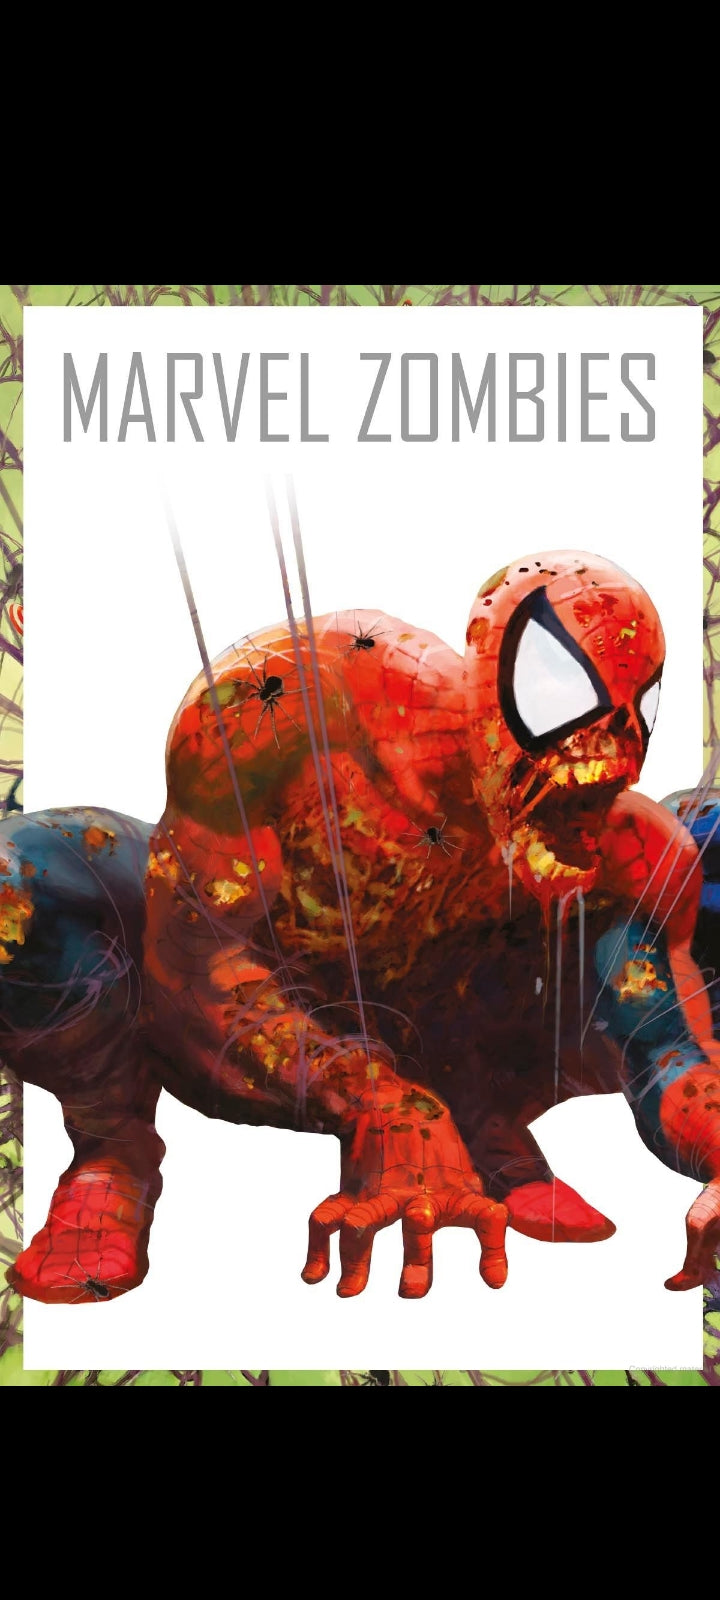 Marvel Must-Have. Marvel Zombies